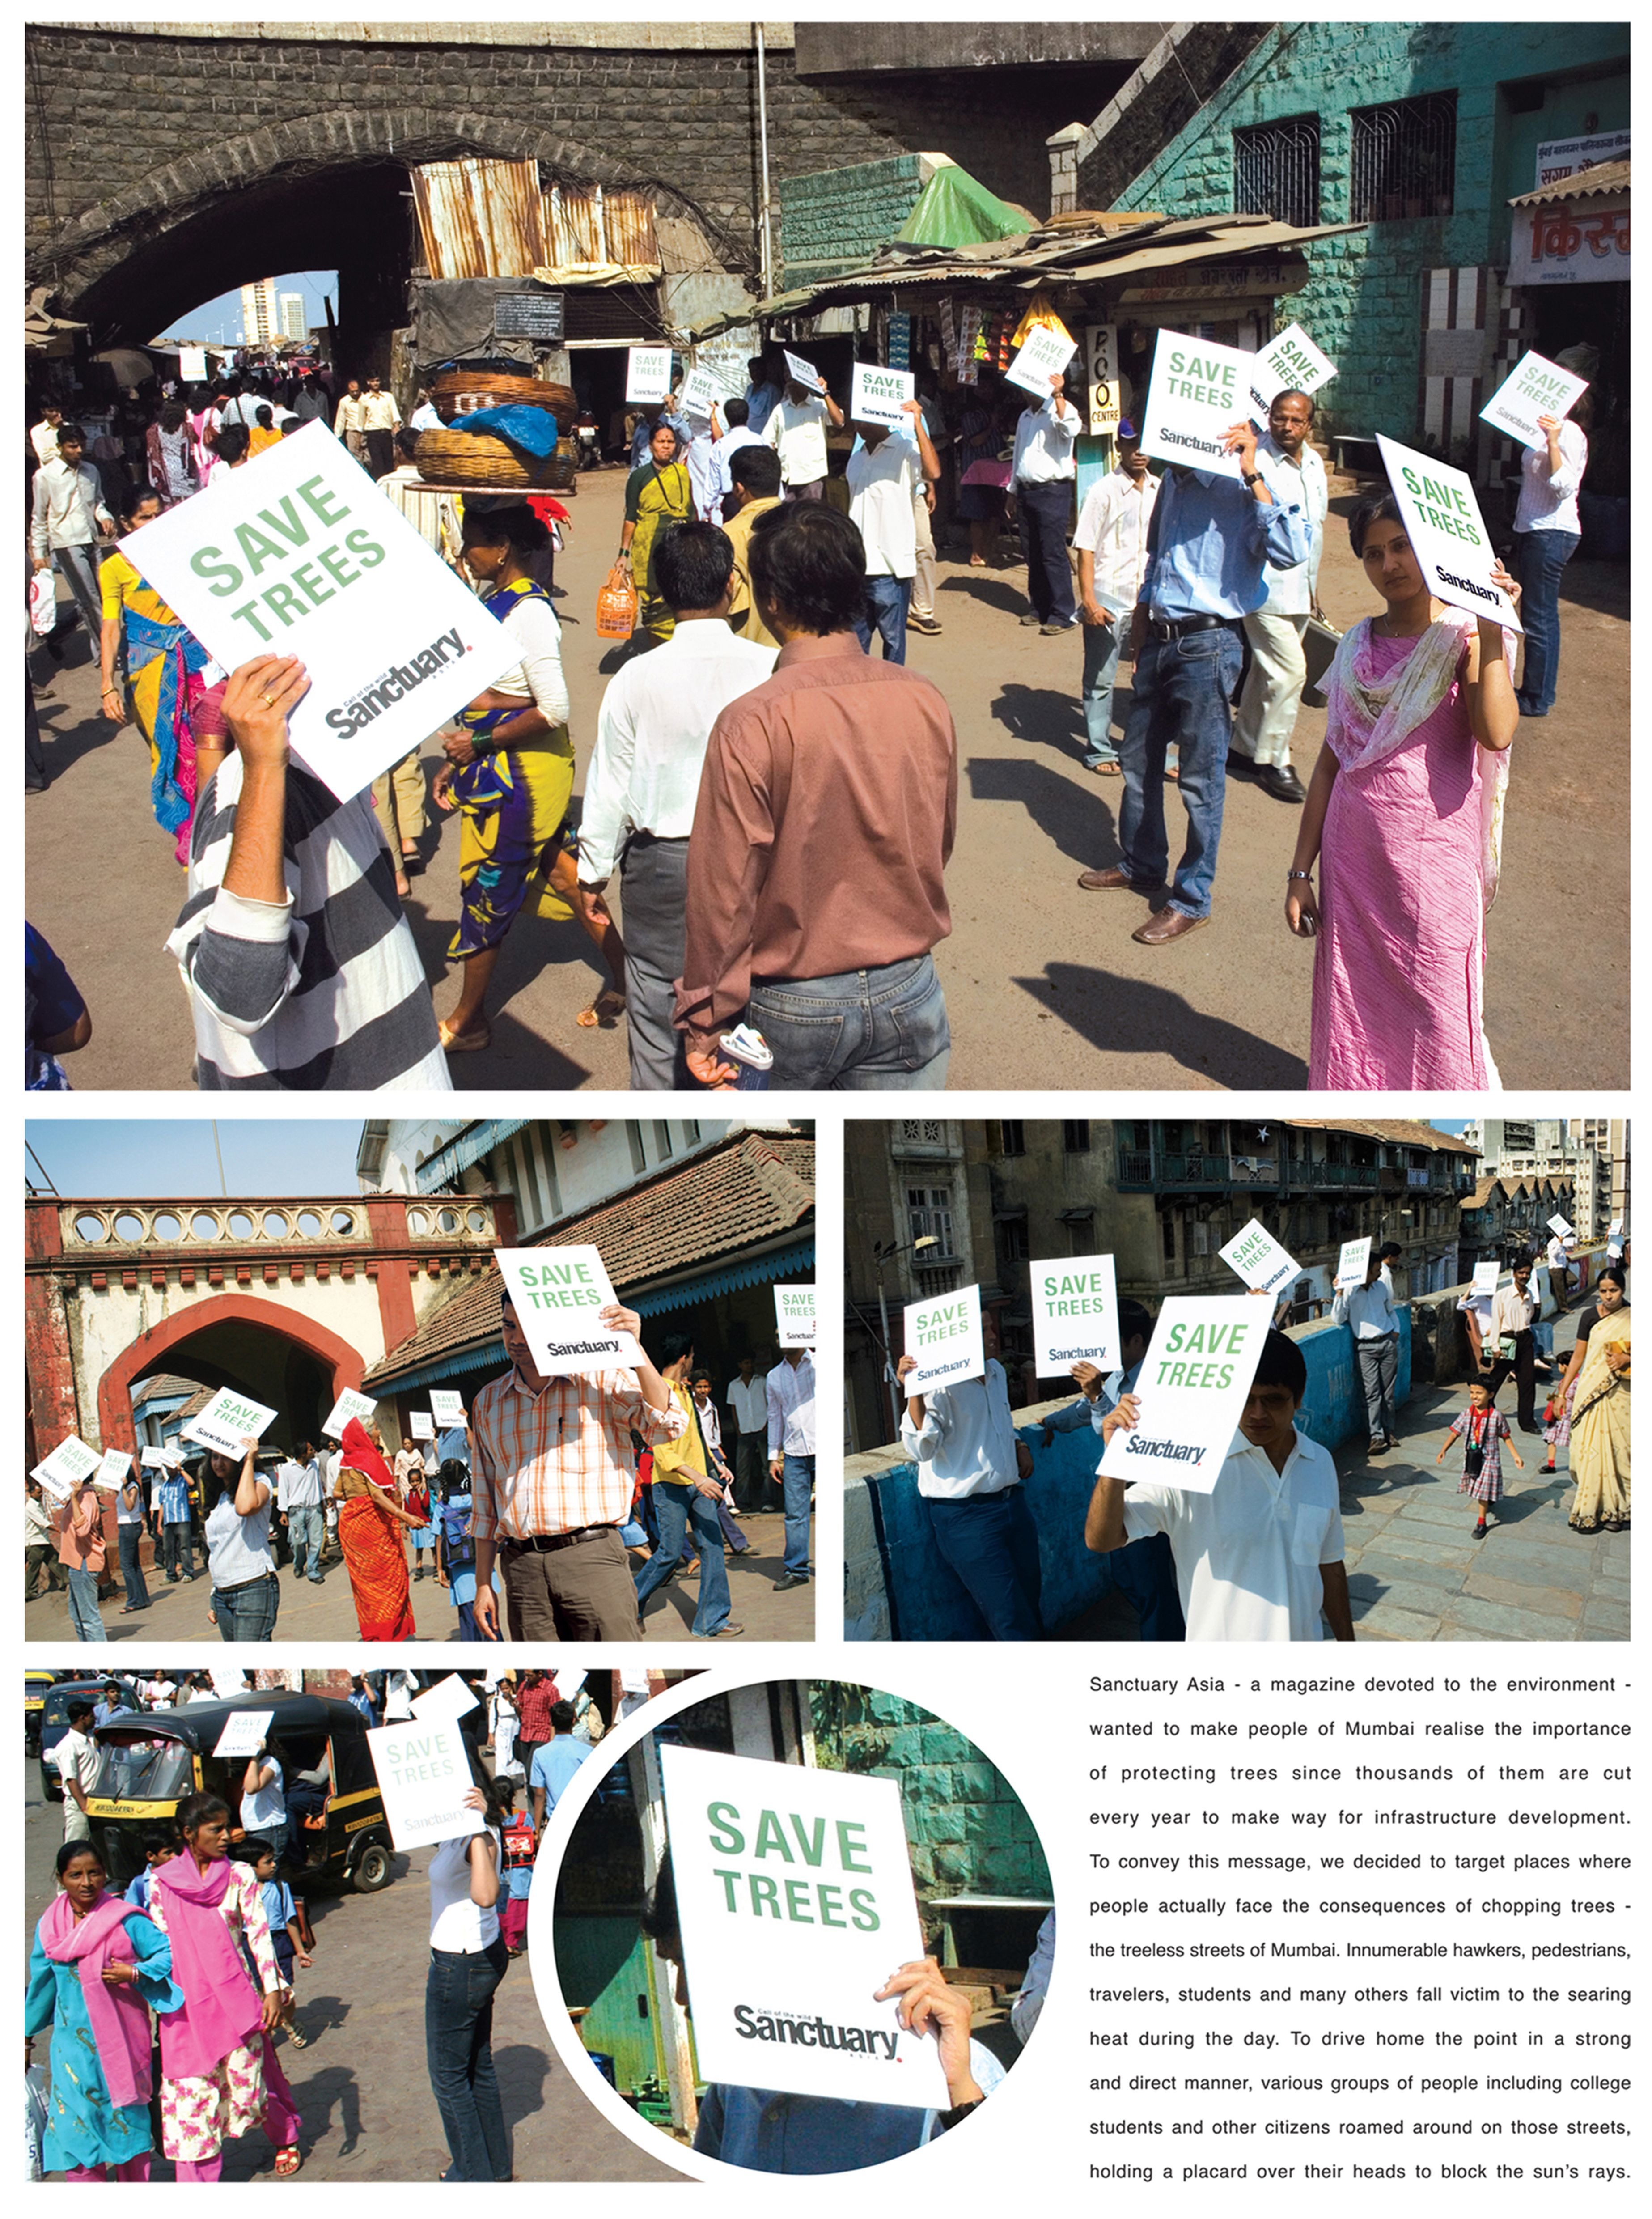 SAVE TREES CAMPAIGN